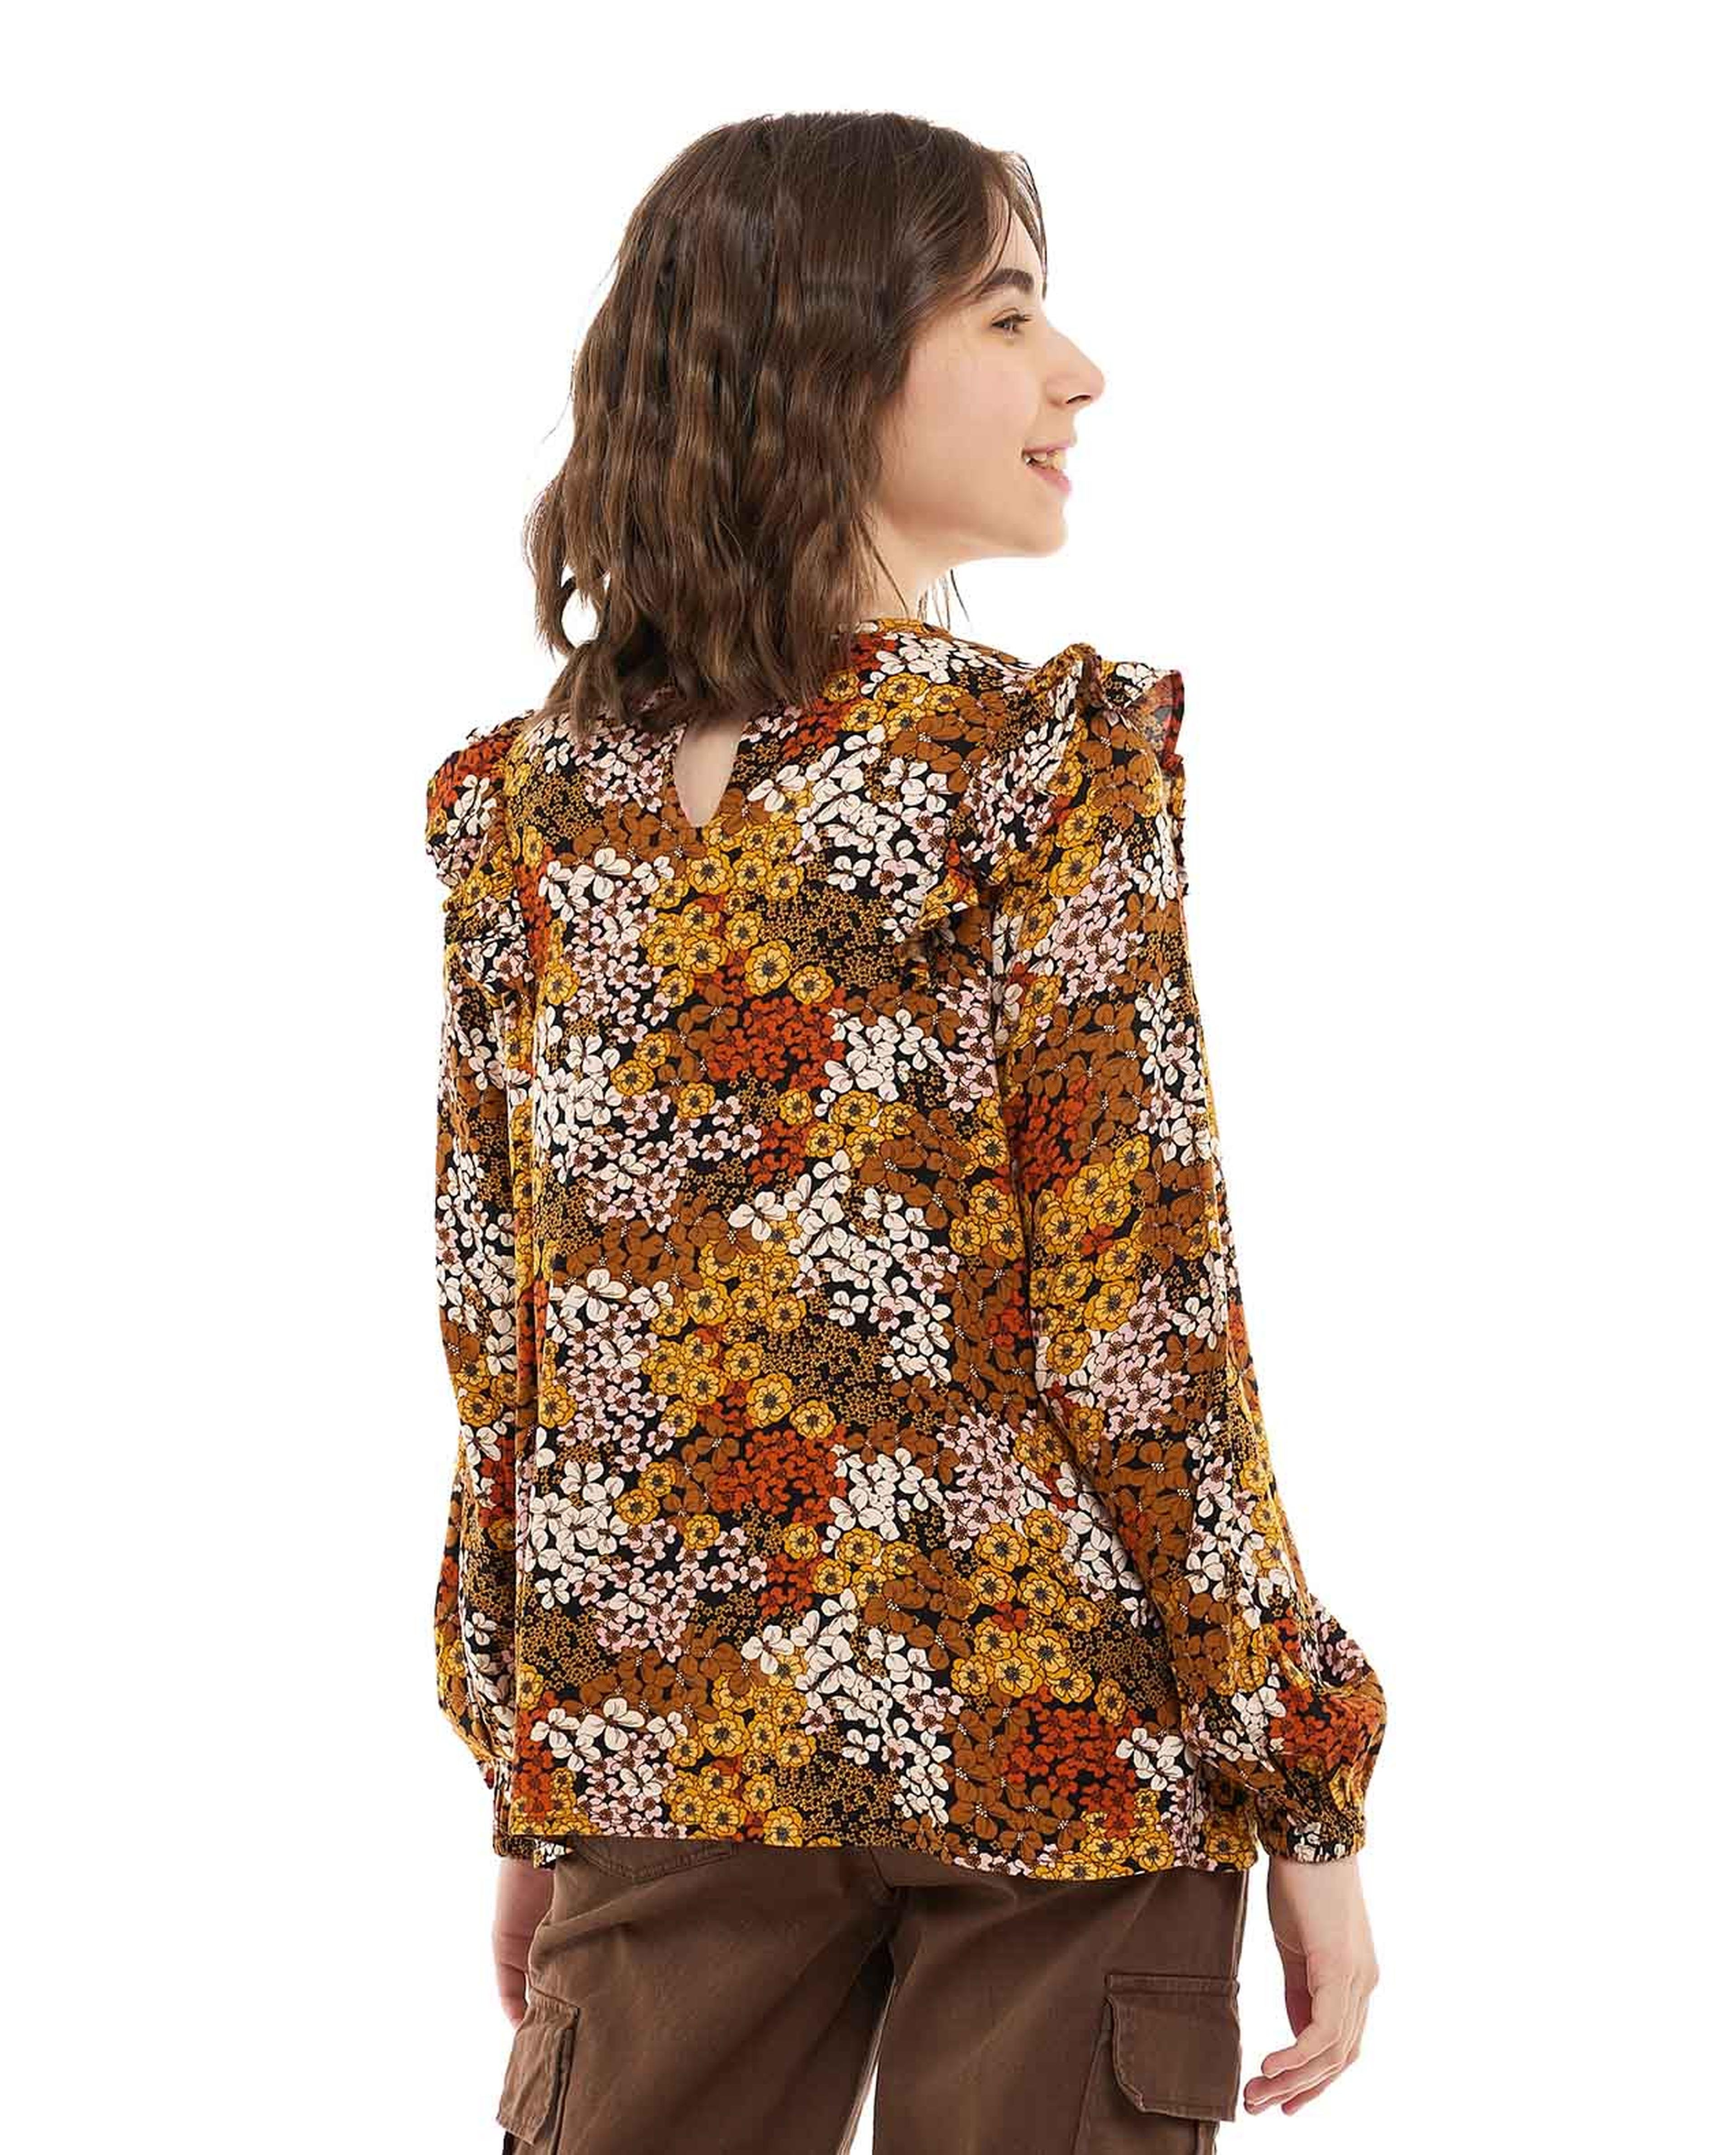 Patterned Top with Crew Neck and Long Sleeves